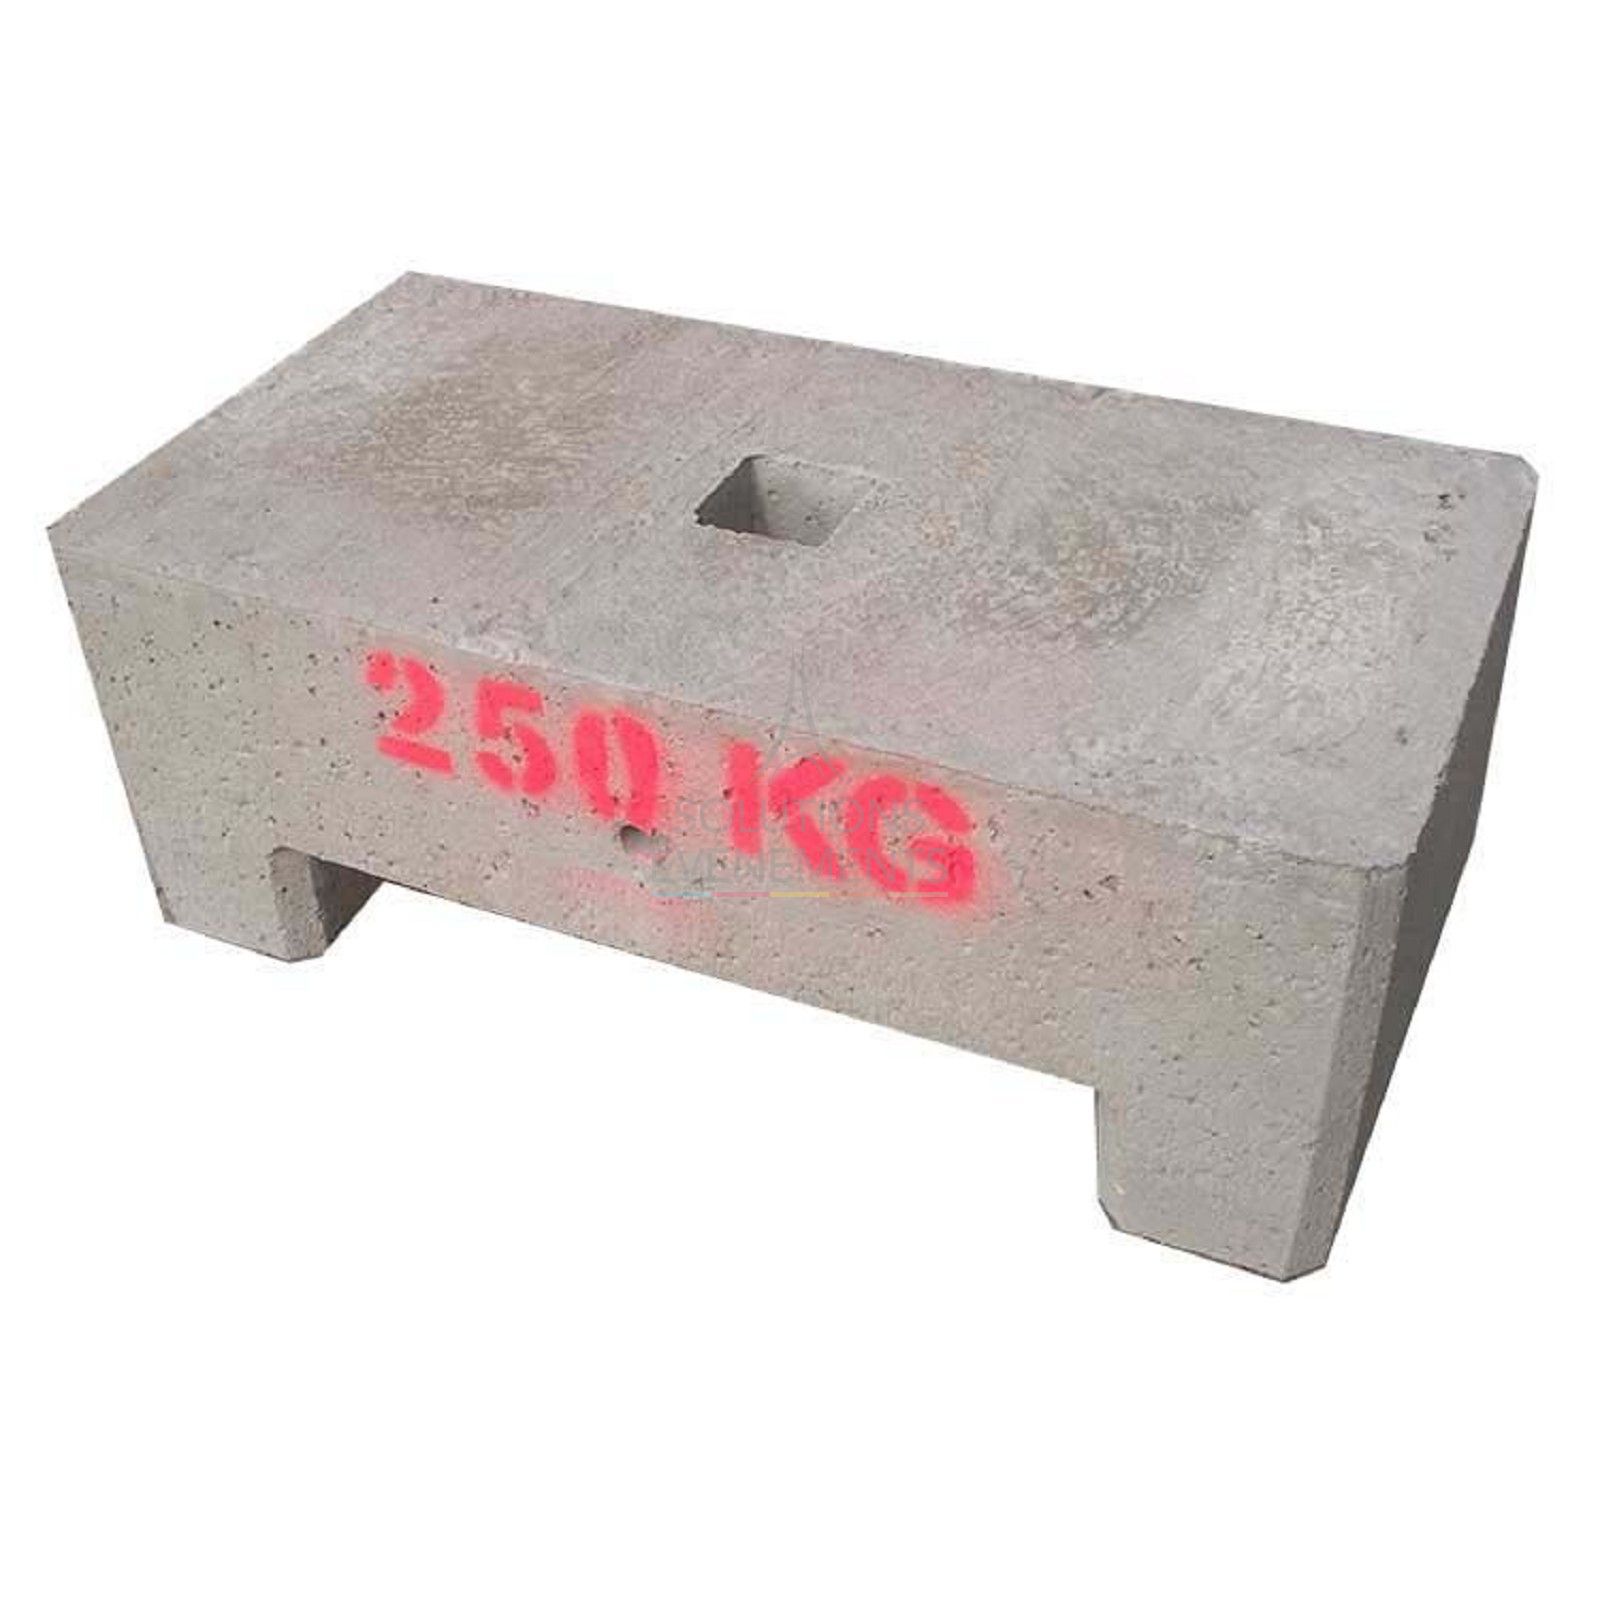 Rental of concrete ballast for heavy structures, tents, sheds